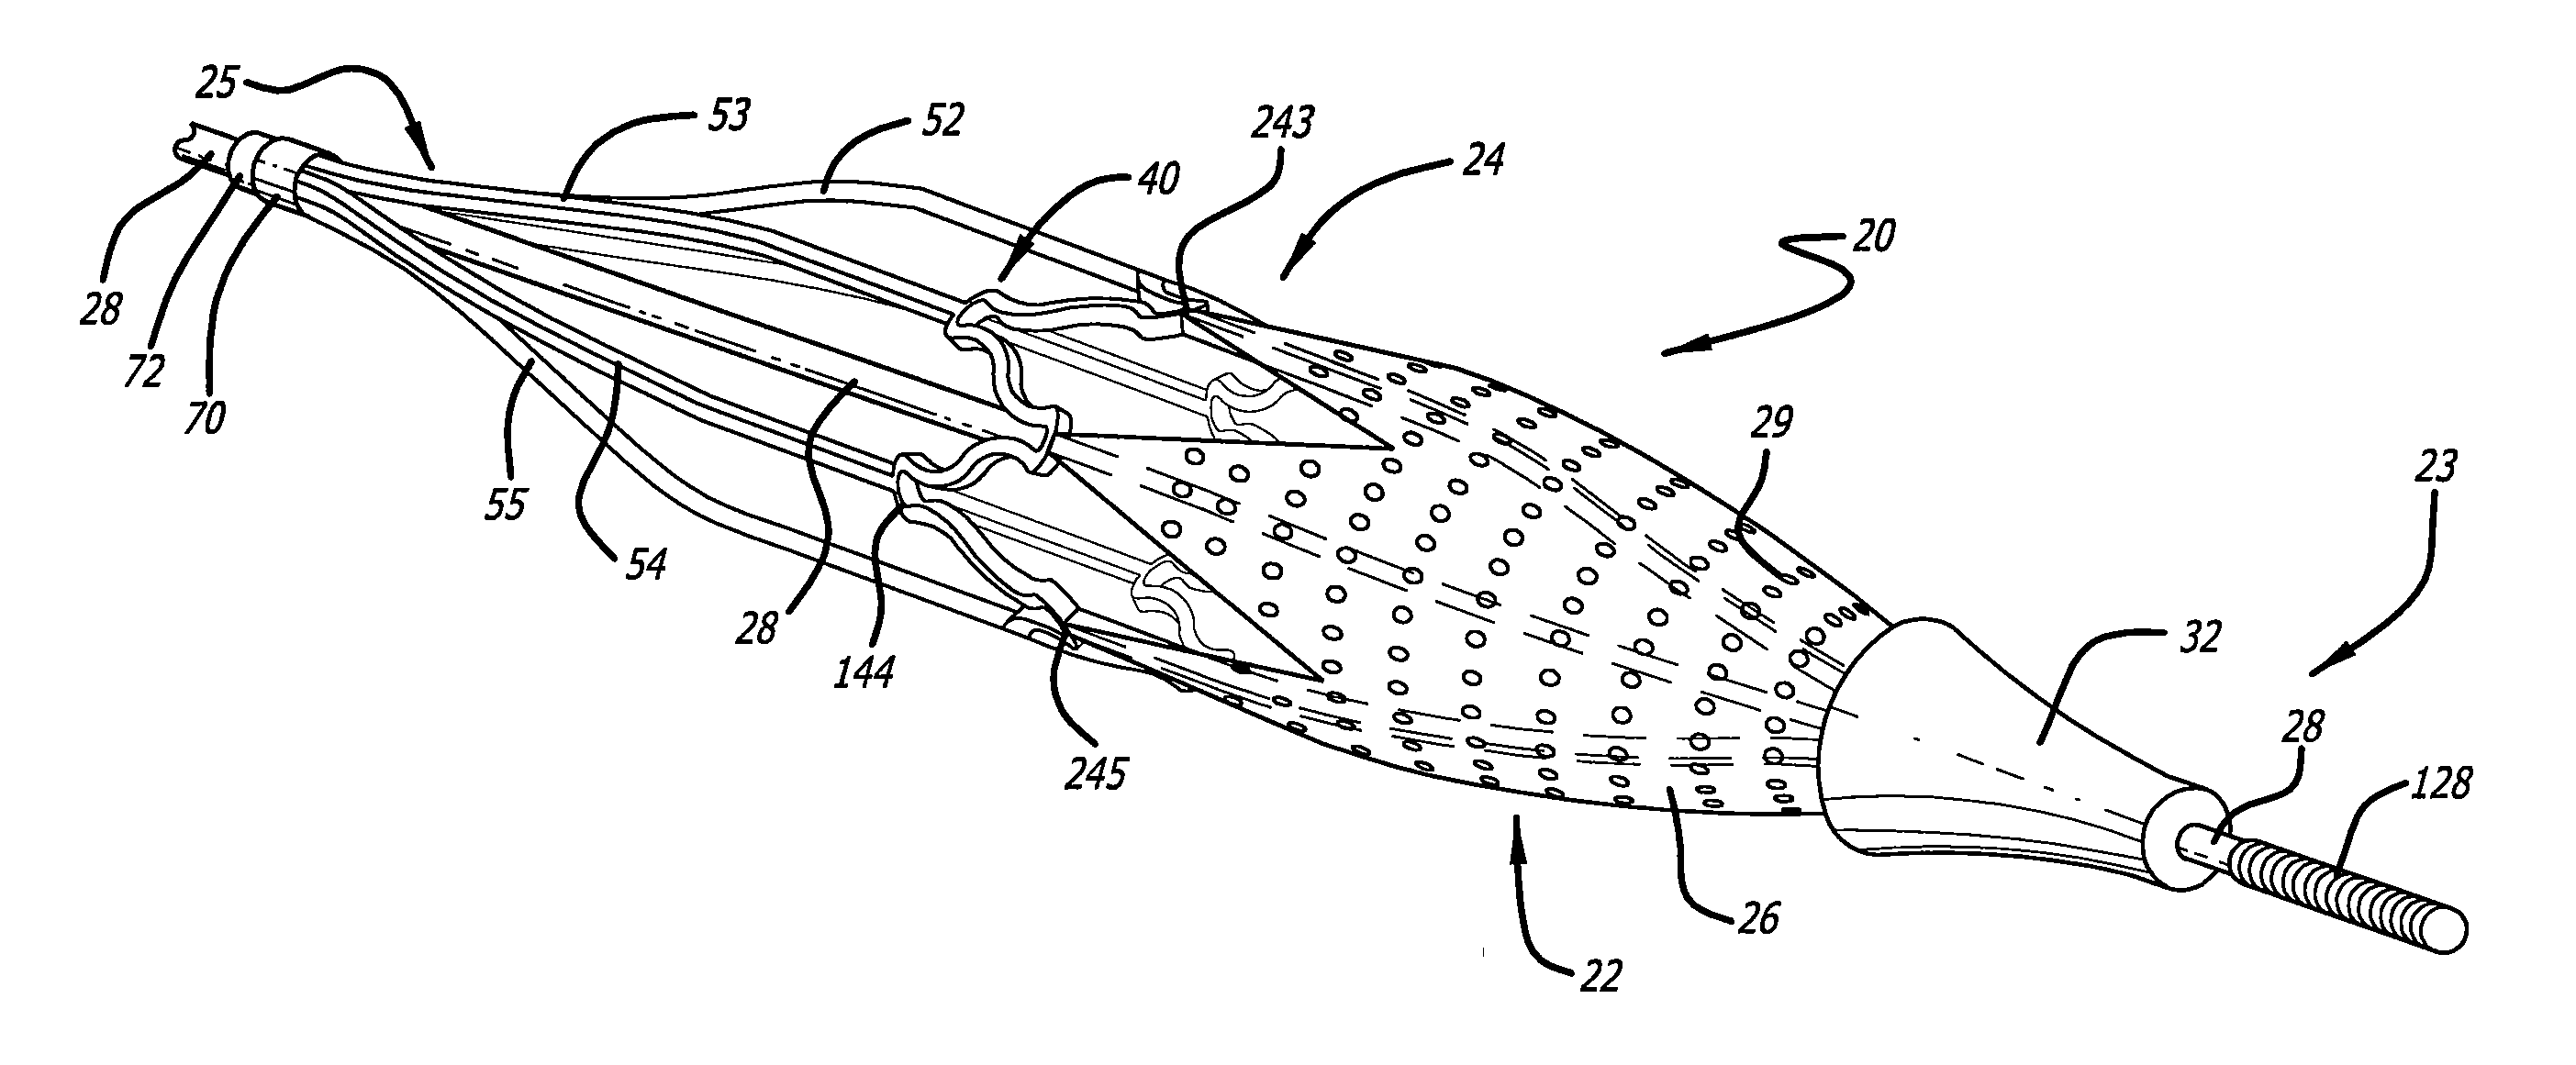 Embolic protection device with open cell design